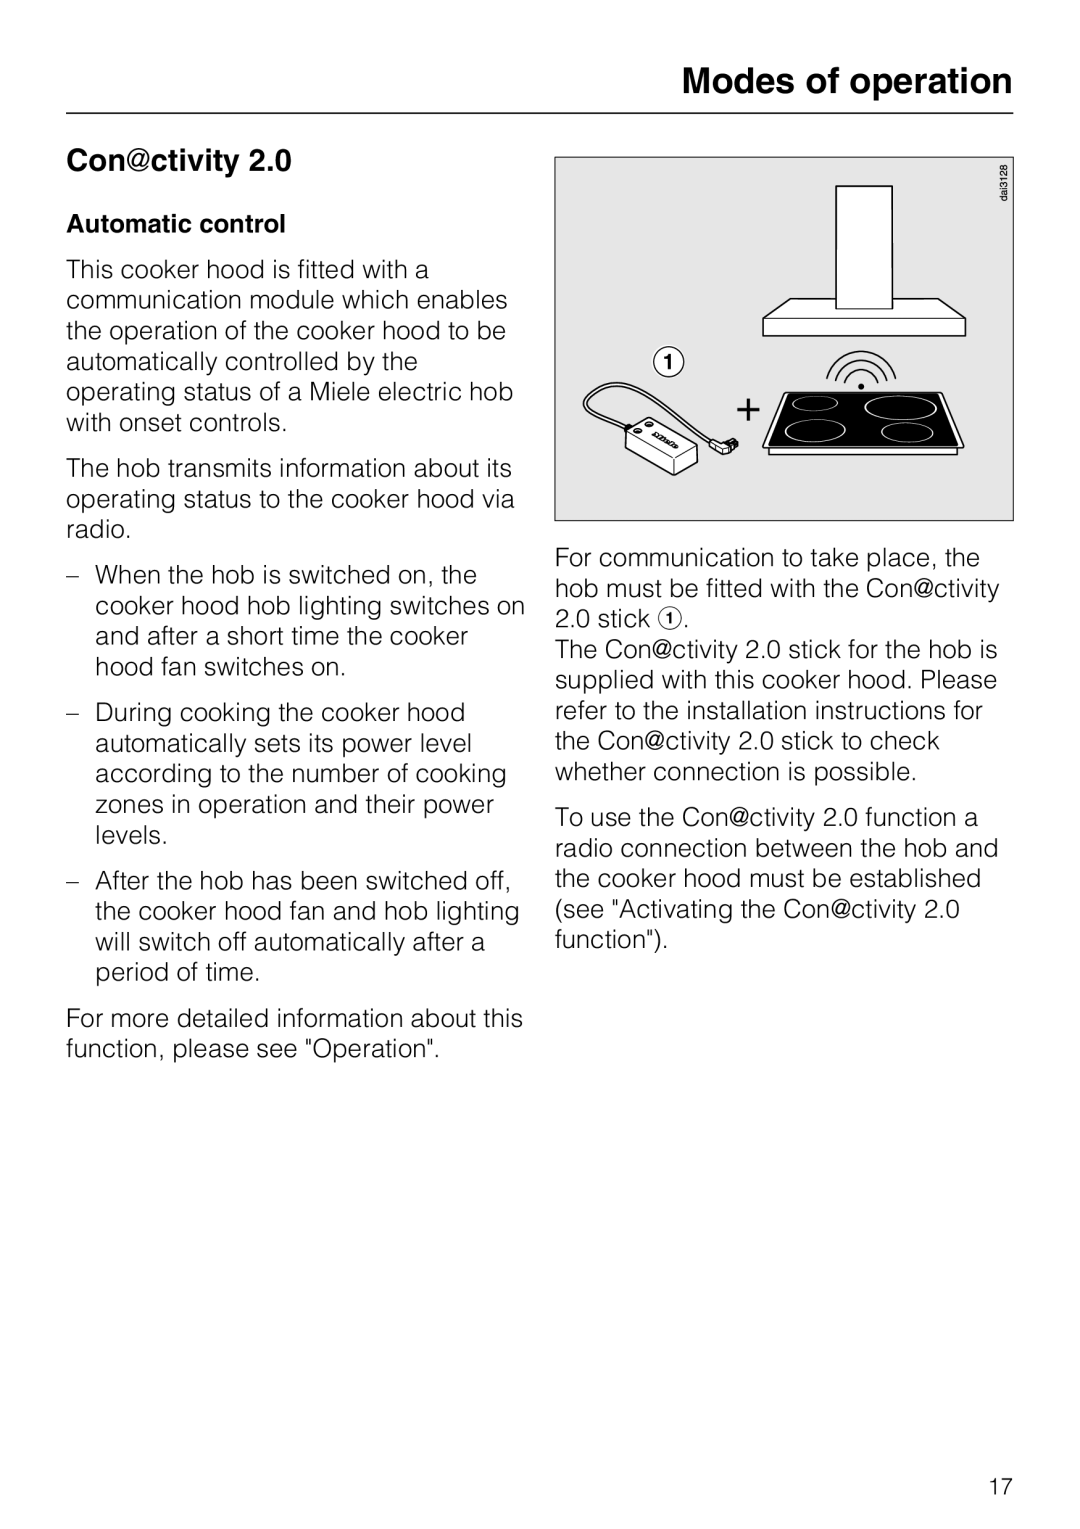 Miele 09 730 840 installation instructions Conctivity, Modes of operation, Automatic control 